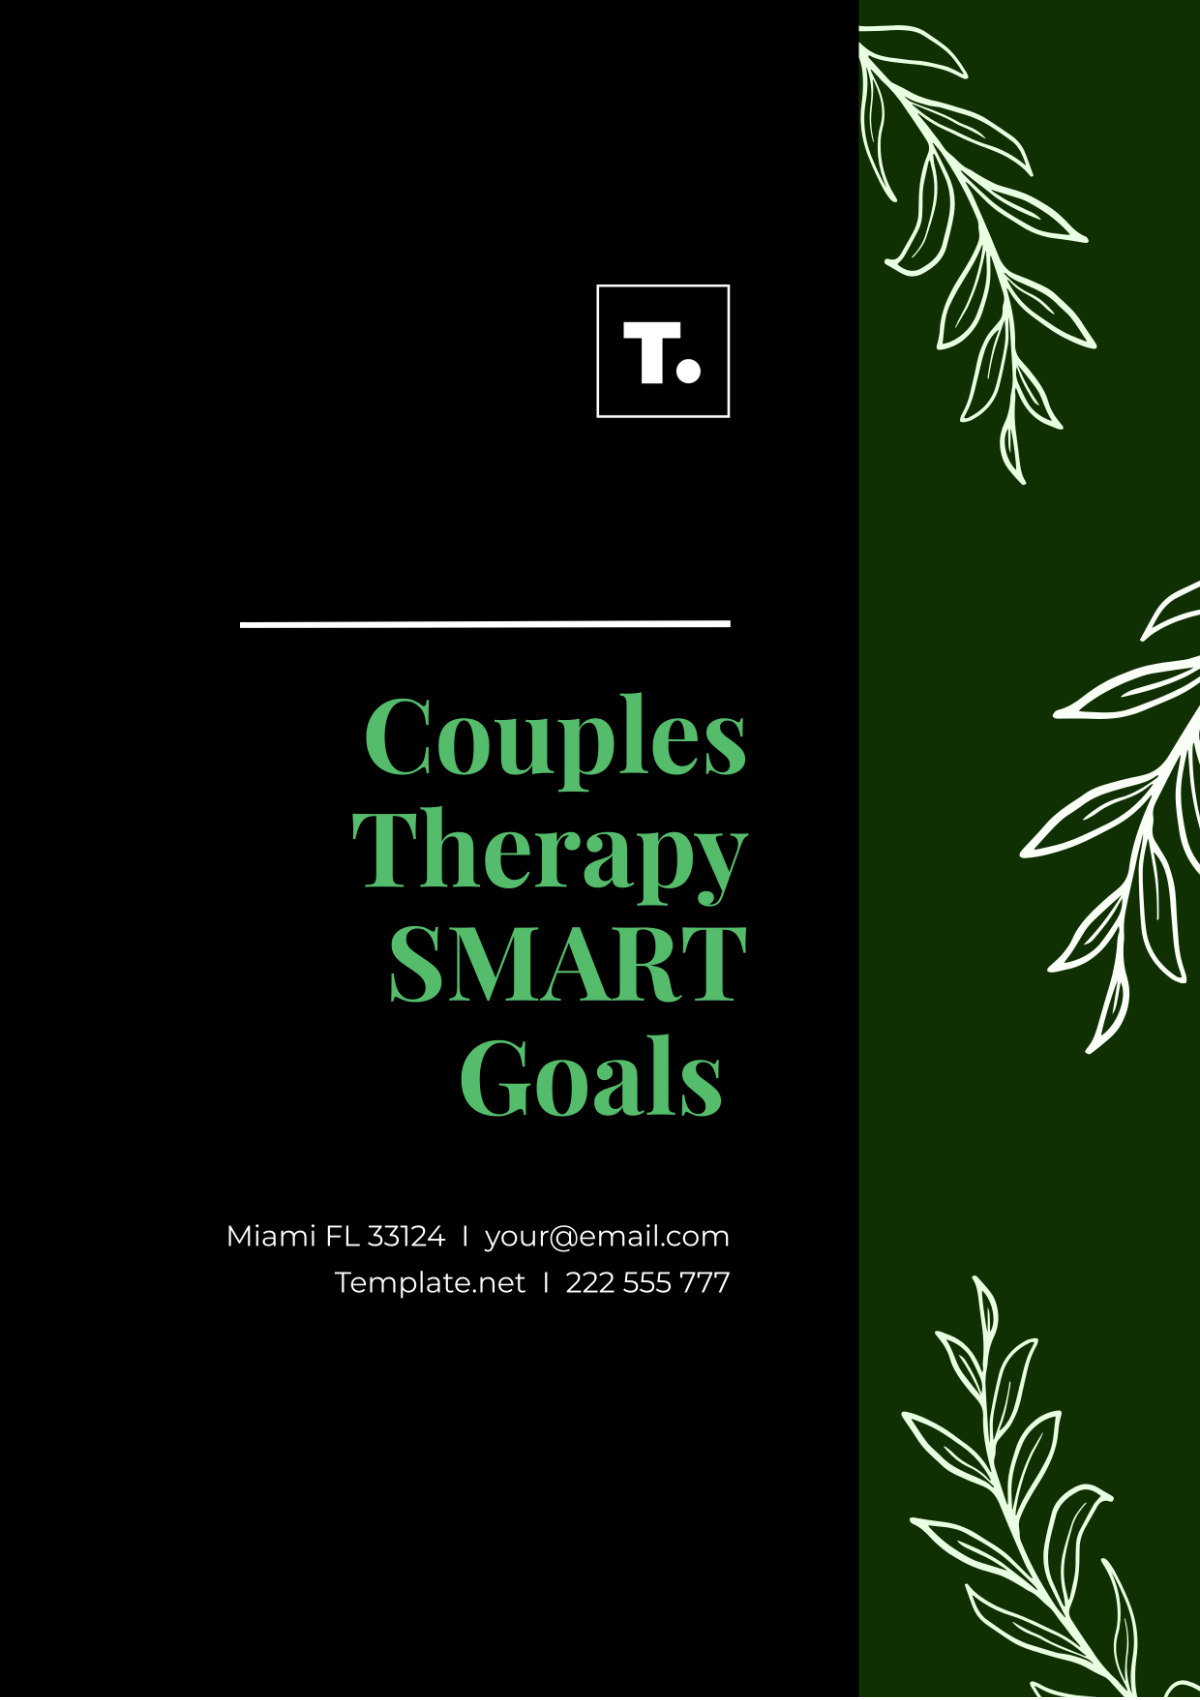 Couples Therapy SMART Goals Template